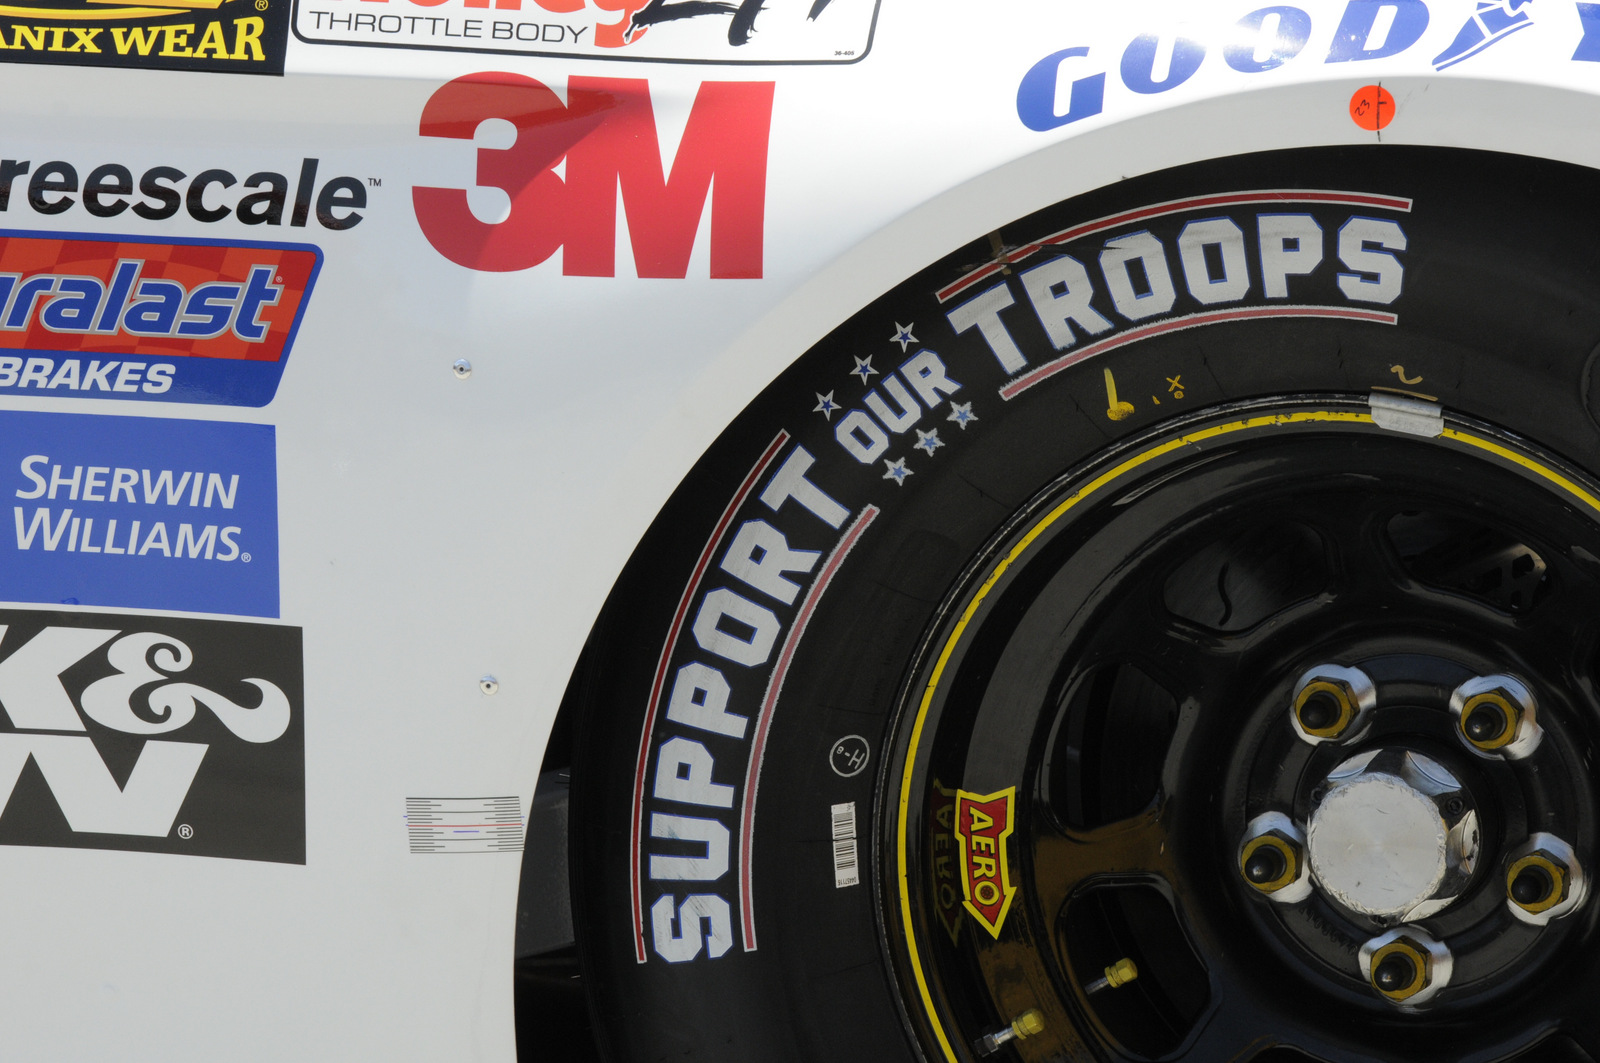 Goodyear racing tires show "Support Our Troops" during practice for Sunday's NASCAR Coca-Cola 600 Sprint Cup series auto race at Charlotte Motor Speedway in Concord, N.C., Thursday, May 21, 2015. (AP/Mike McCarn)